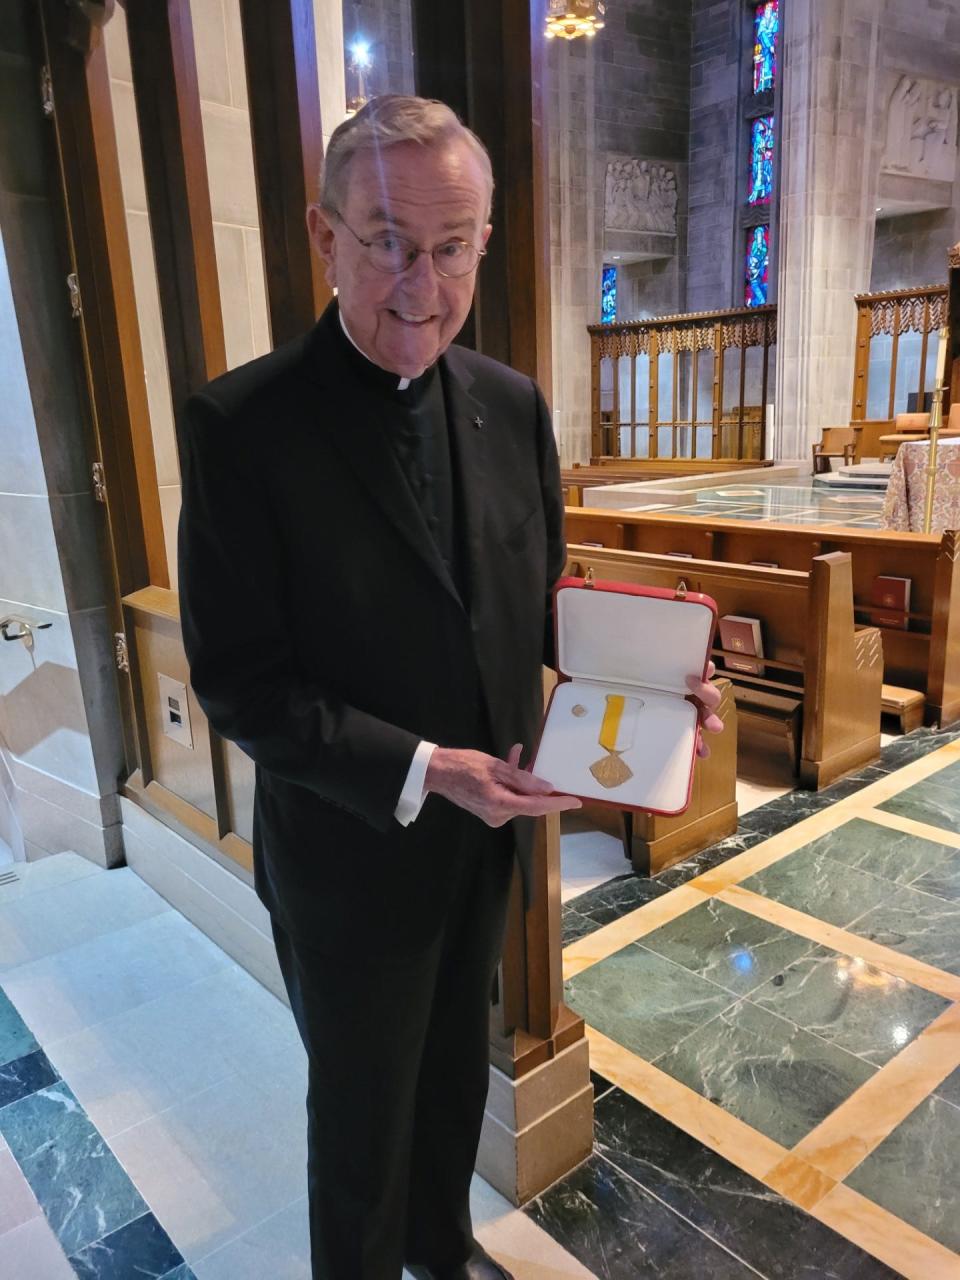 Rev. Melvin Blanchette, formerly from Newport, received the Cross Pro Ecclesia et Pontifice medal for service to the Catholic Church.